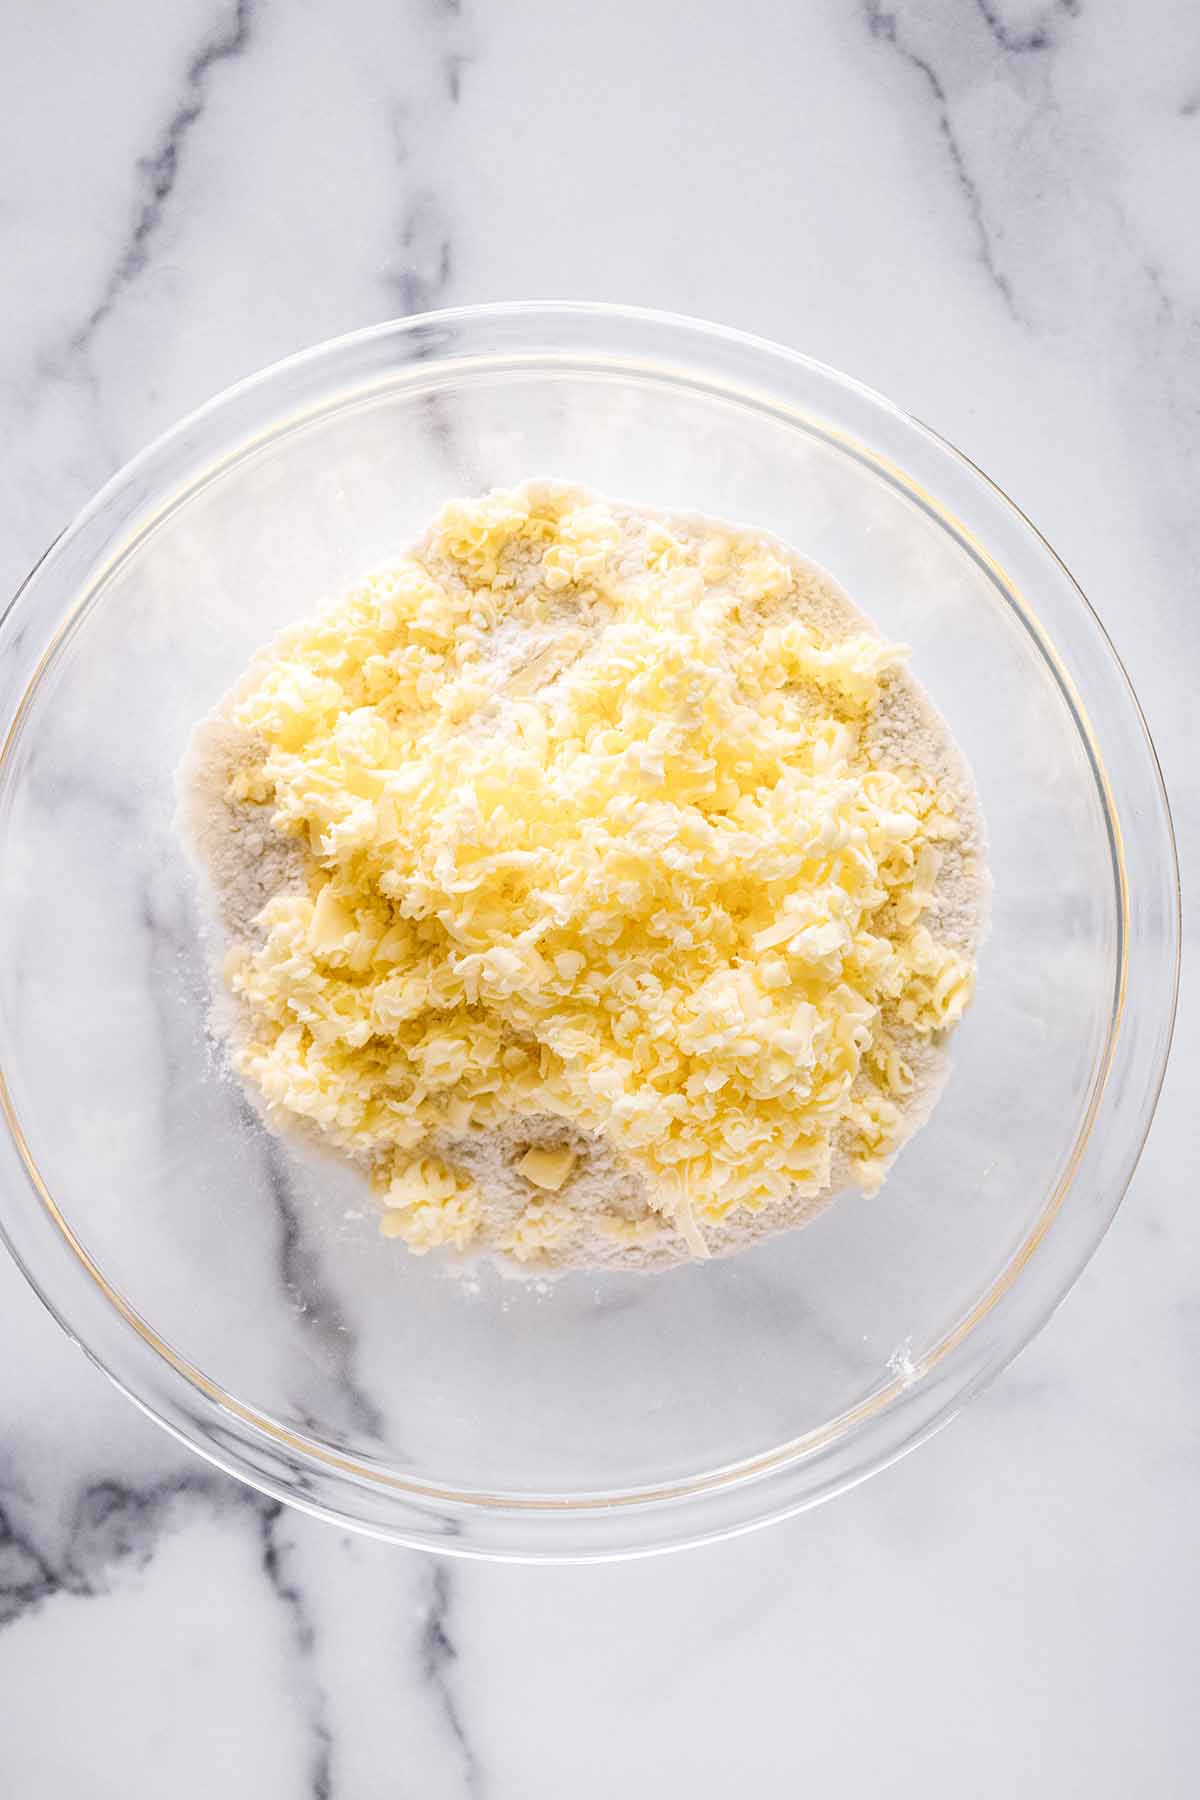 Butter and flour in a glass bowl on a marble background.